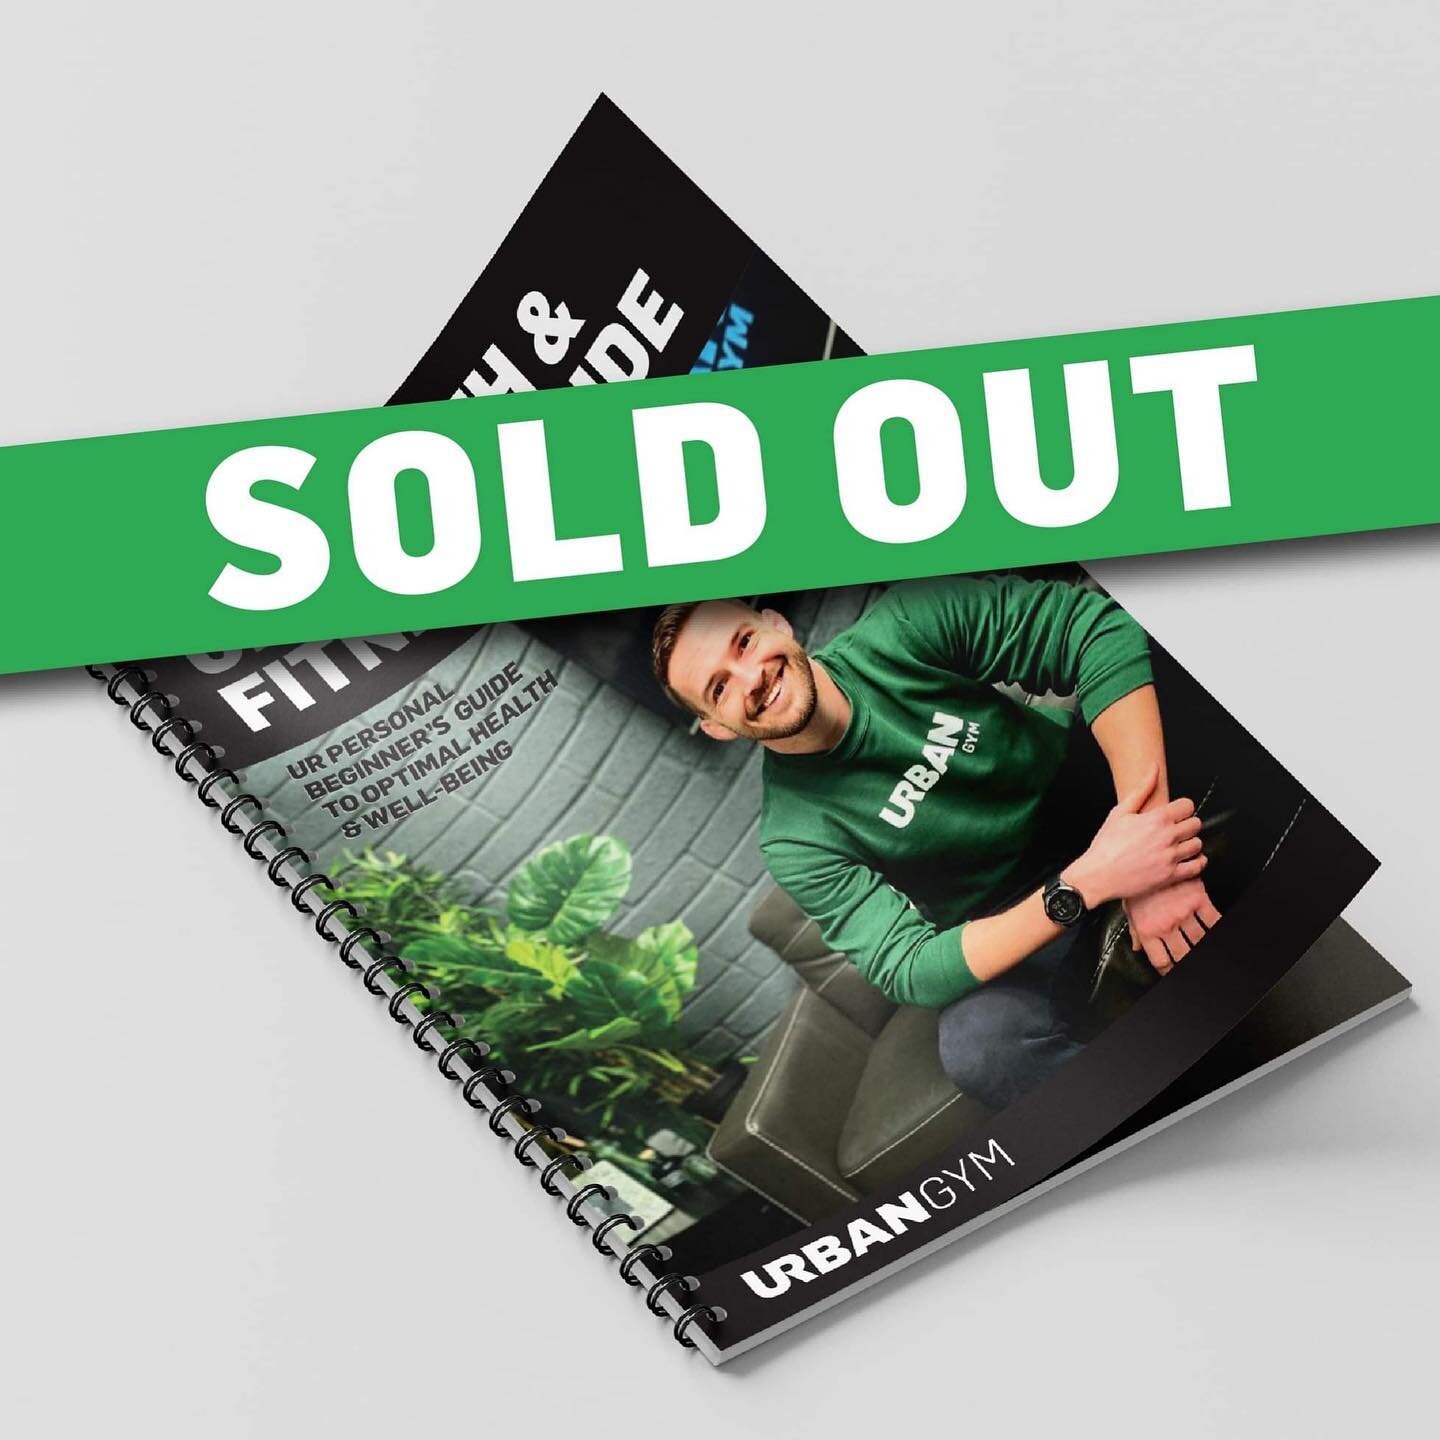 Our books have all sold out, wow, honestly thank you all so much for the support 💚🖤🙏 Don&rsquo;t worry if you missed out, you can still download it from the website plus we&rsquo;ll be restocking the shelves with more books early next week. Send u